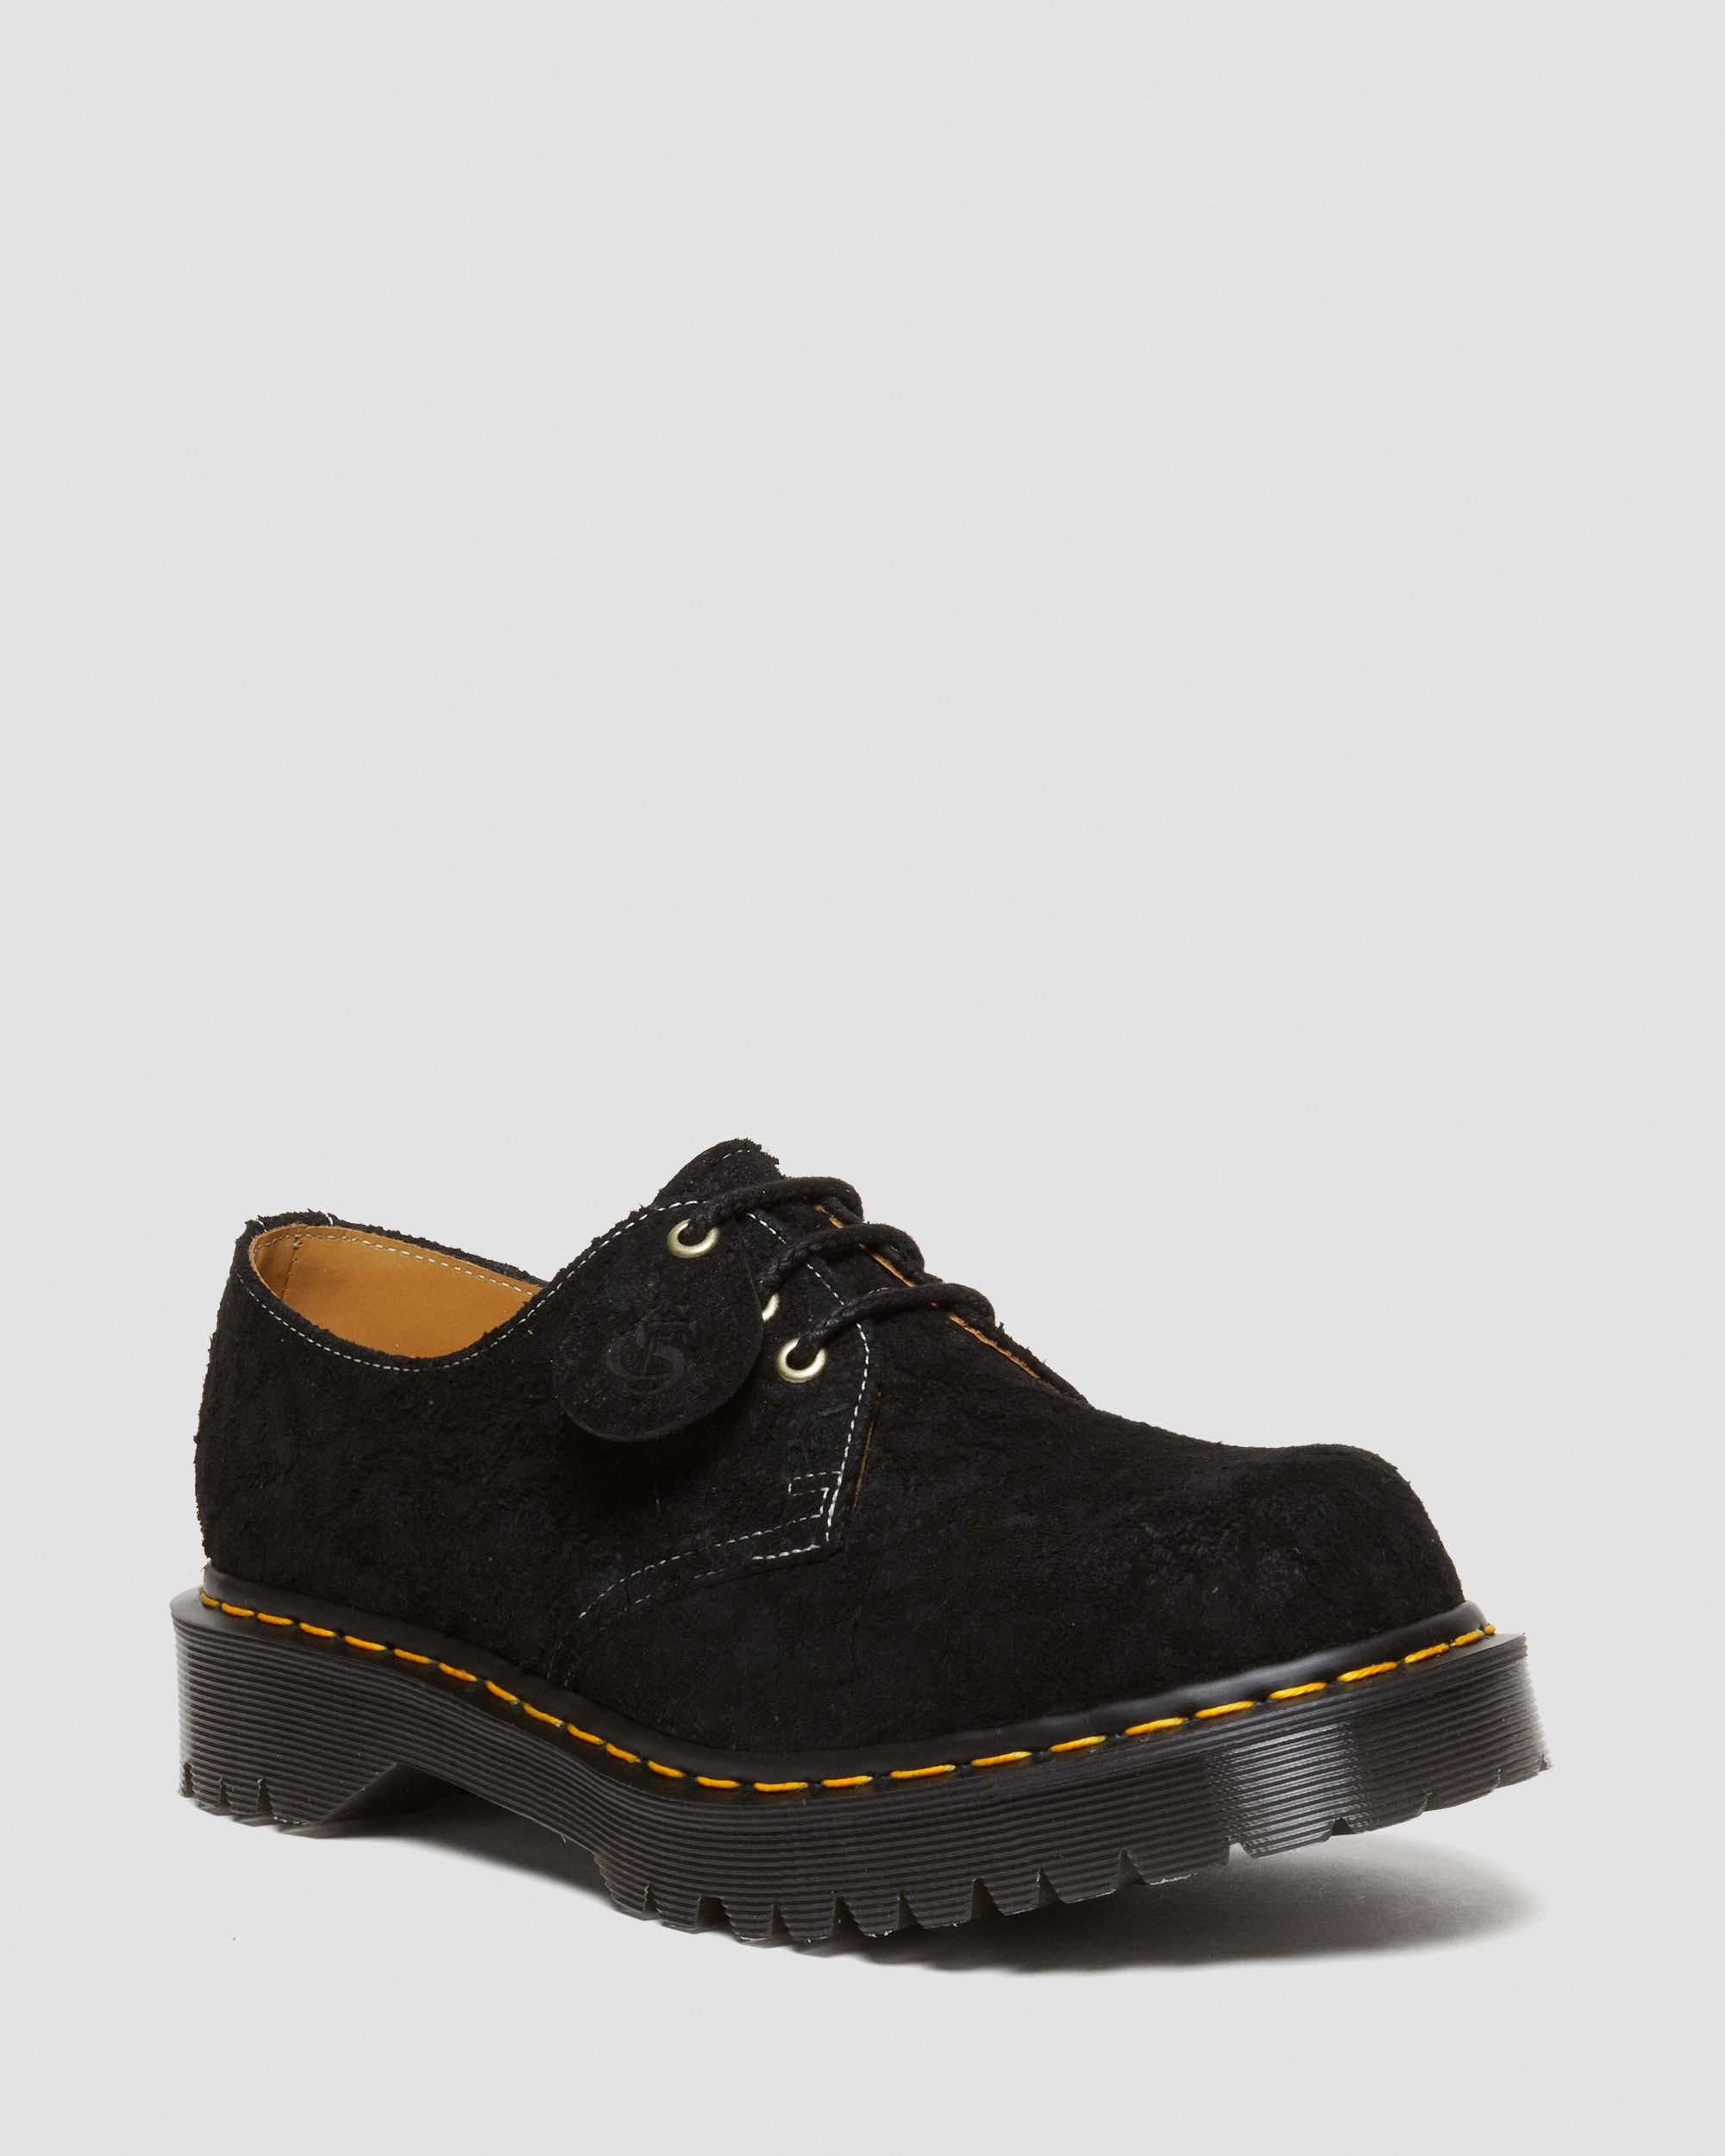 1461 Bex Made in England Emboss Suede Oxford Shoes in Black | Dr. Martens